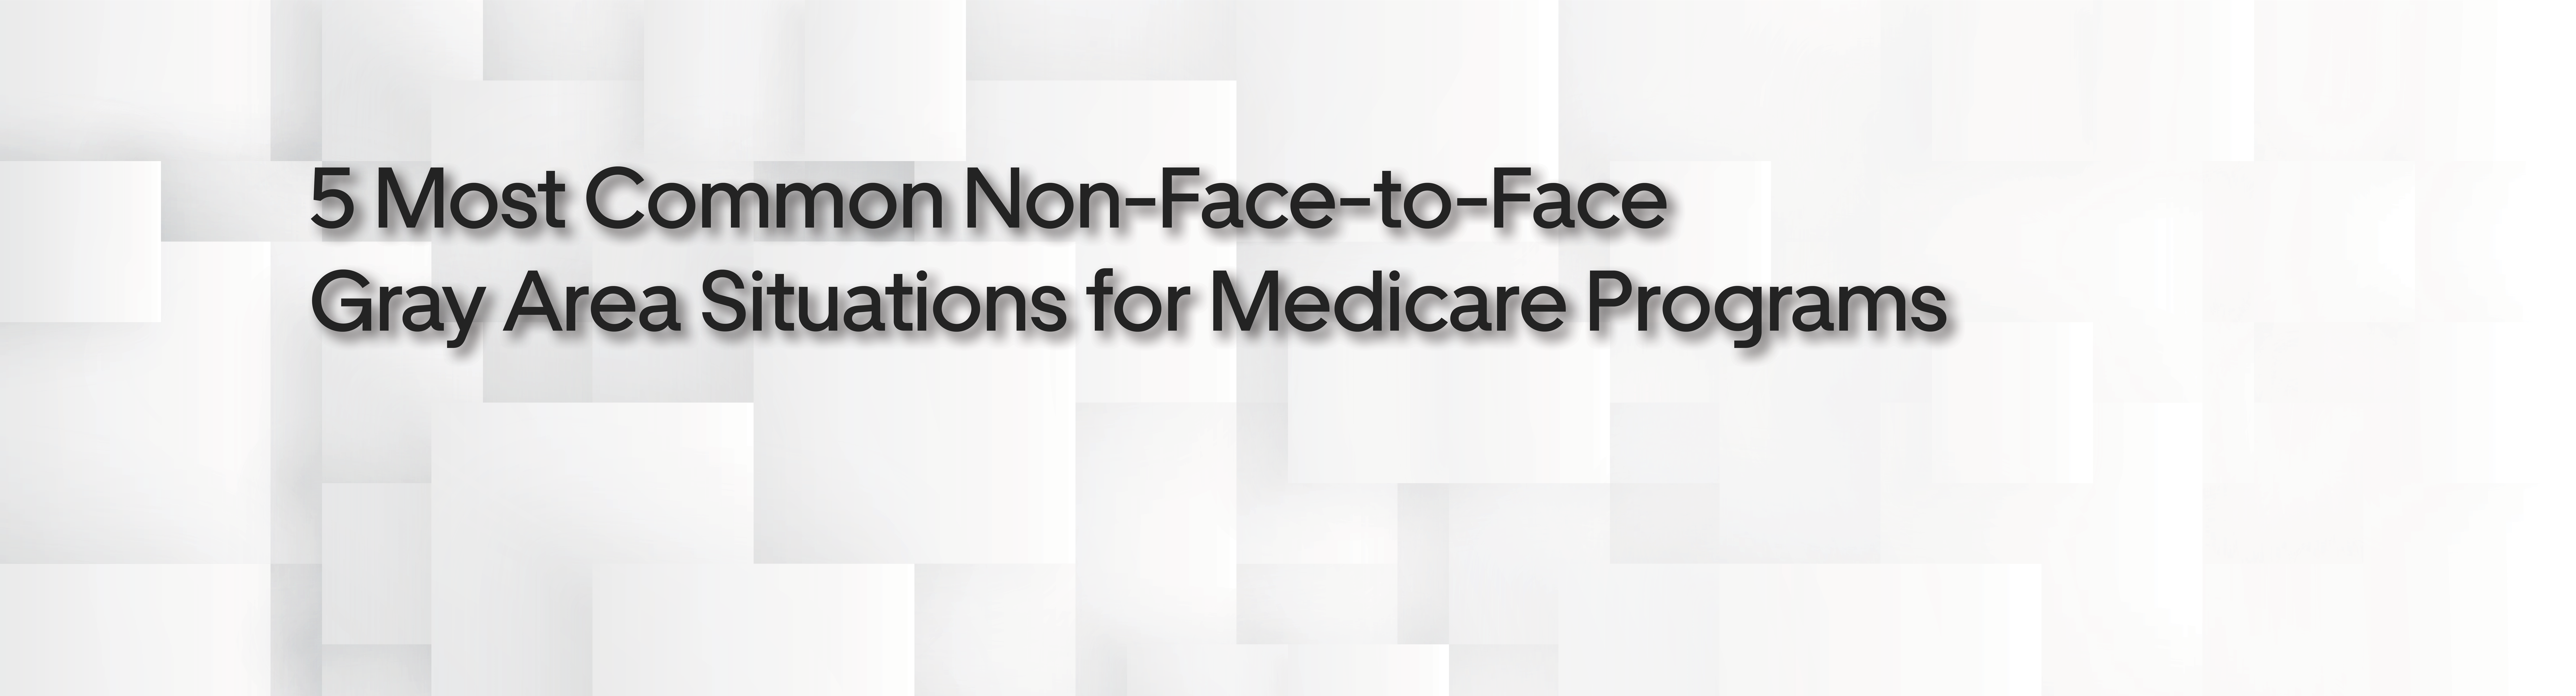 5 Most Common Non-Face-to-Face Gray Area Situations for Medicare Programs